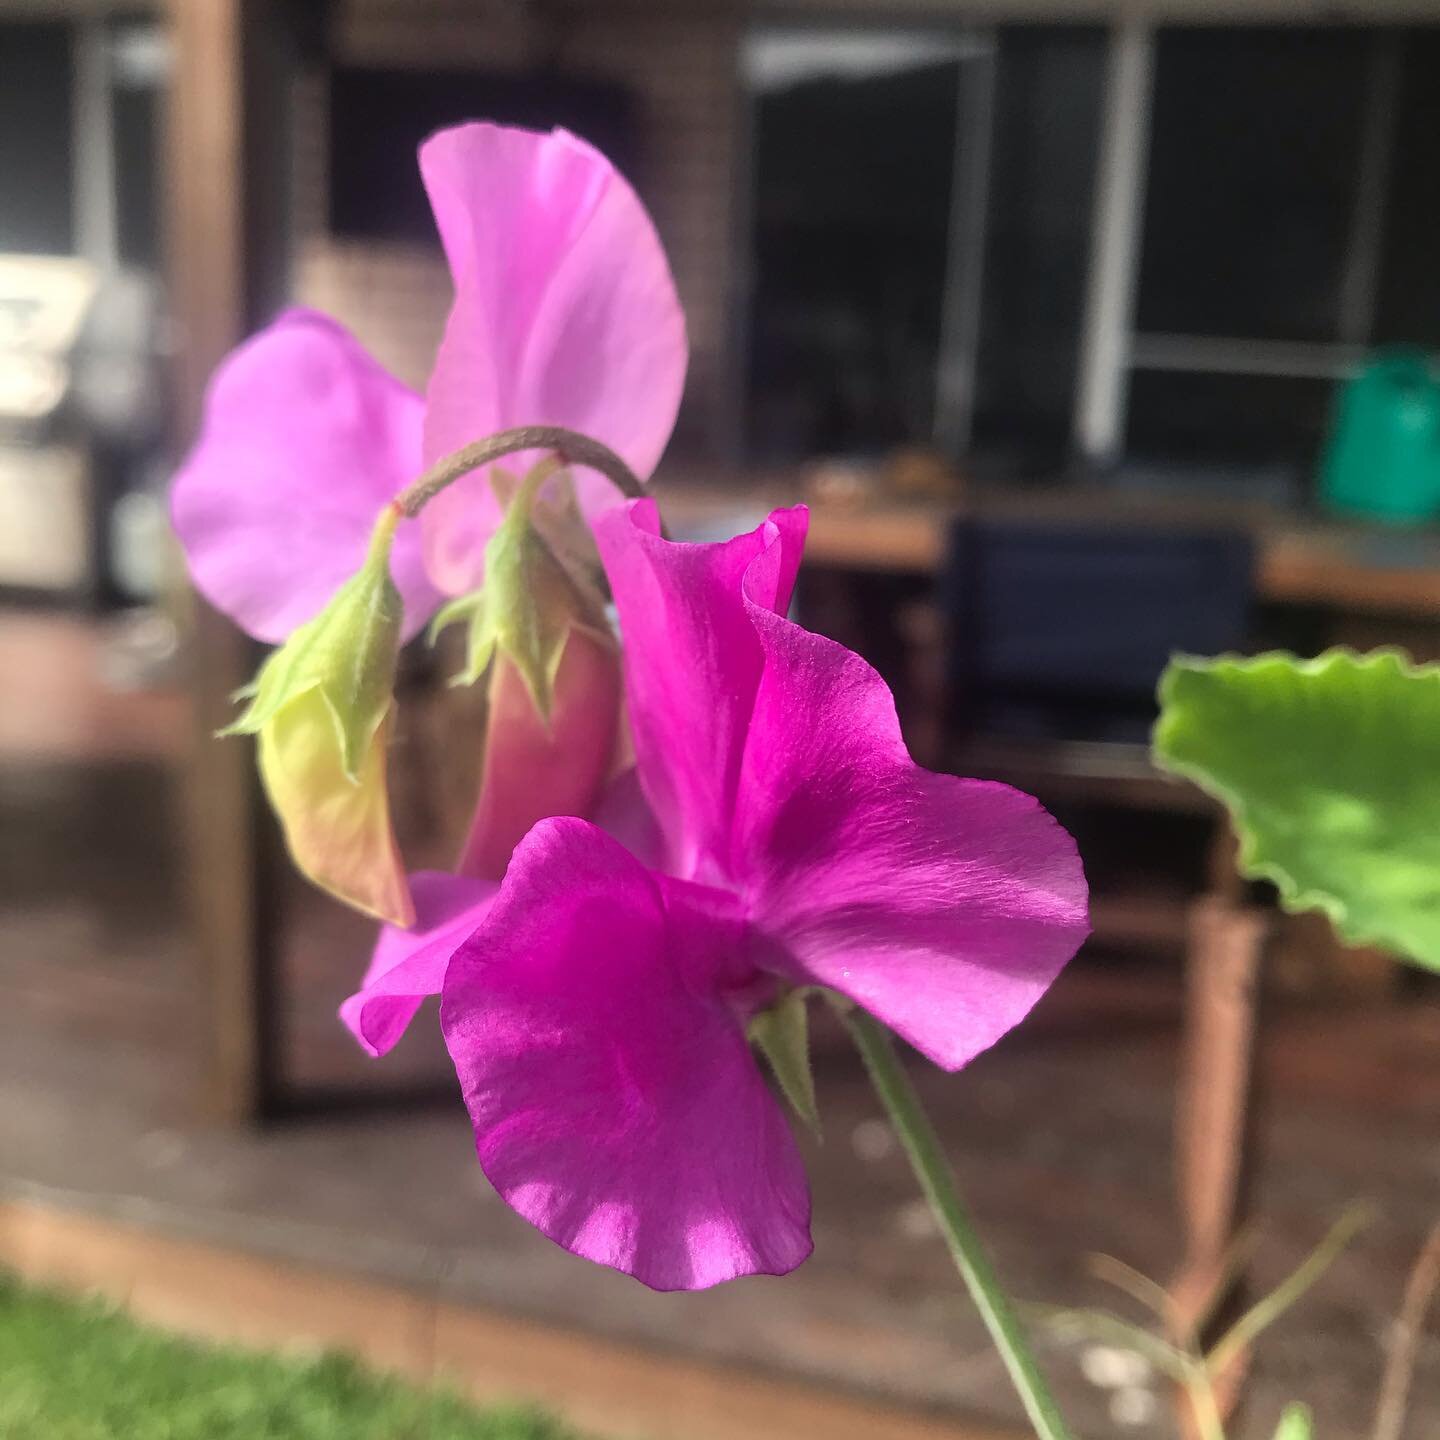 My first sweet pea opened this morning 

Grown from a @theseedcollection seed ❤️❤️ 

And my first geranium, grown from a cutting from my grandmother&rsquo;s garden 🌸🌼🌱

#cutflowergarden #grownfromseed #australiangarden